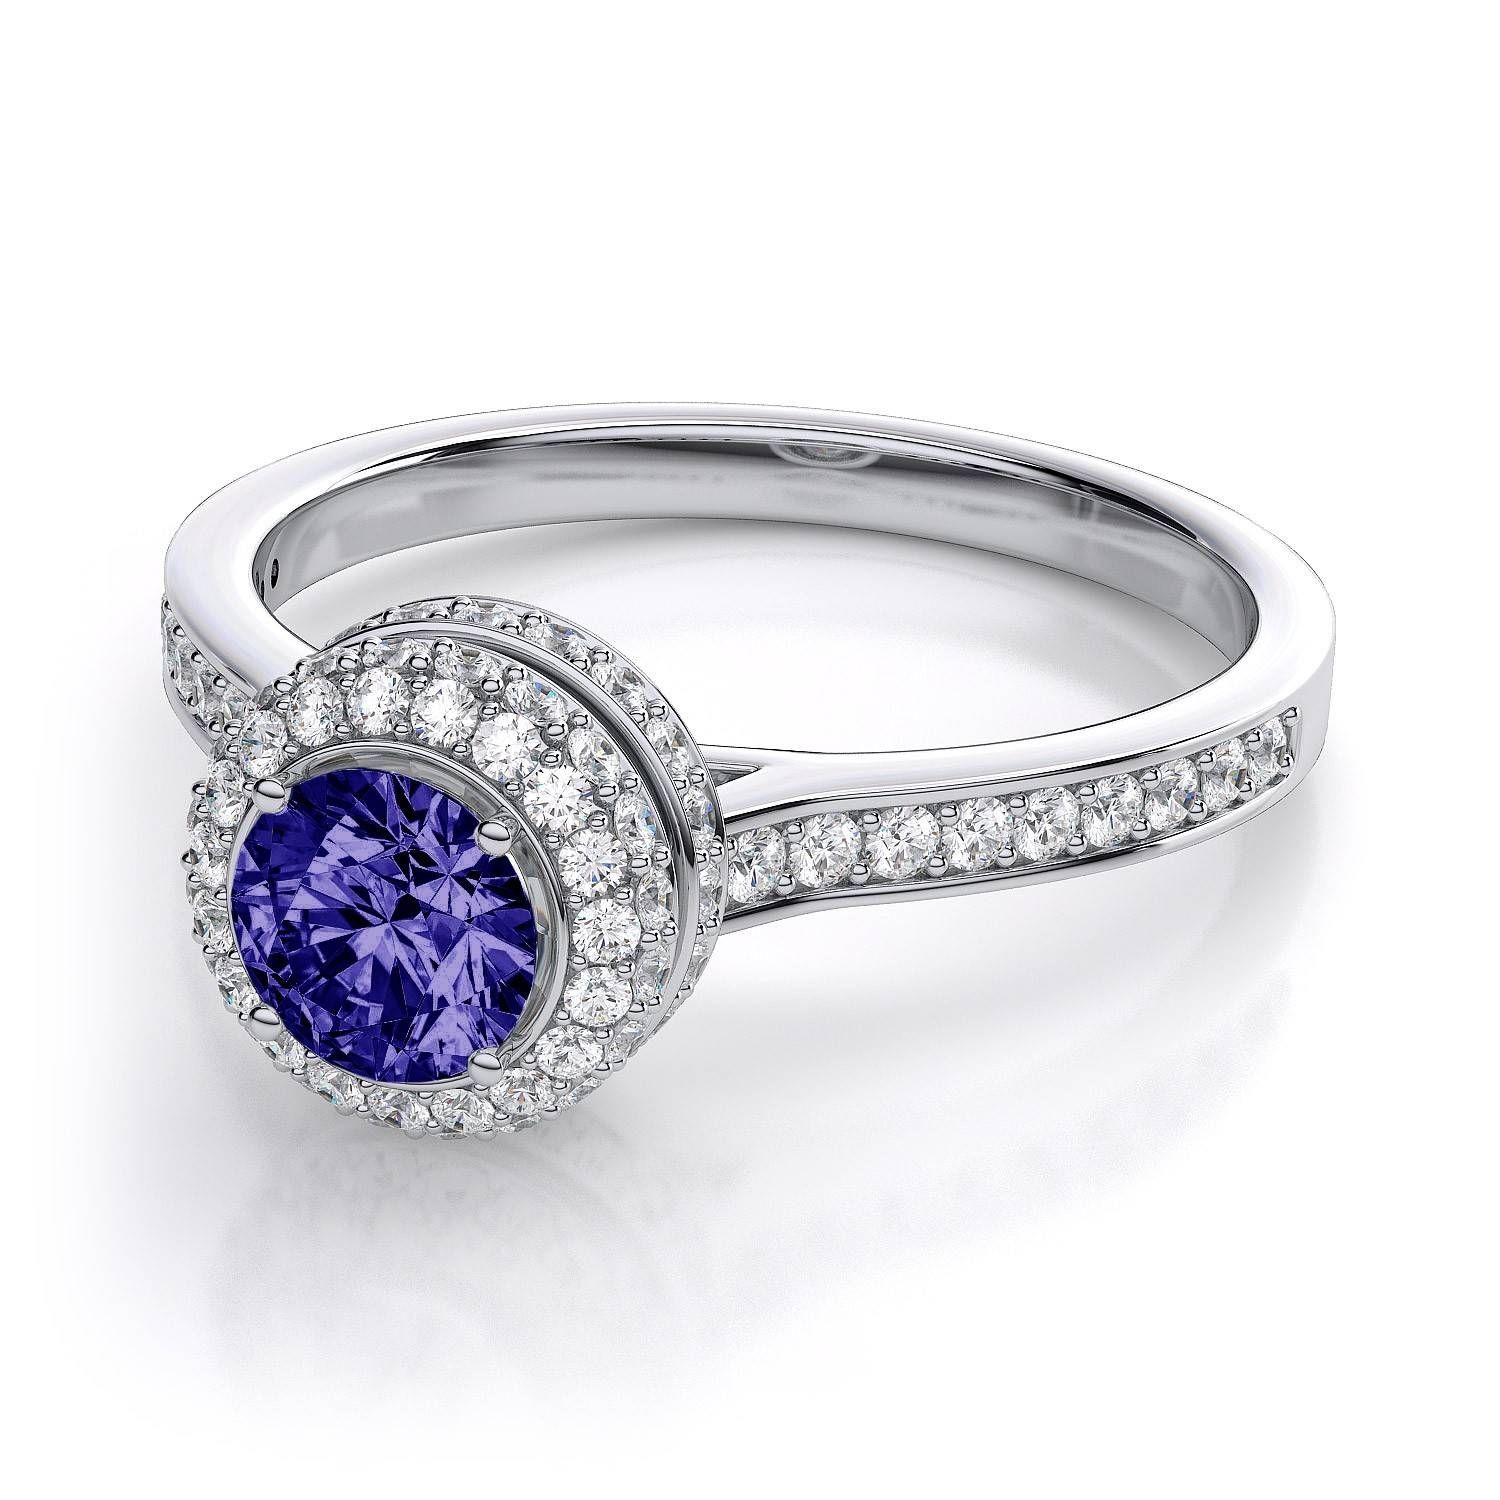 Cirque Halo Tanzanite And Diamond Engagement Ring In 14k White Gold Throughout White Gold Tanzanite Engagement Rings (View 6 of 15)